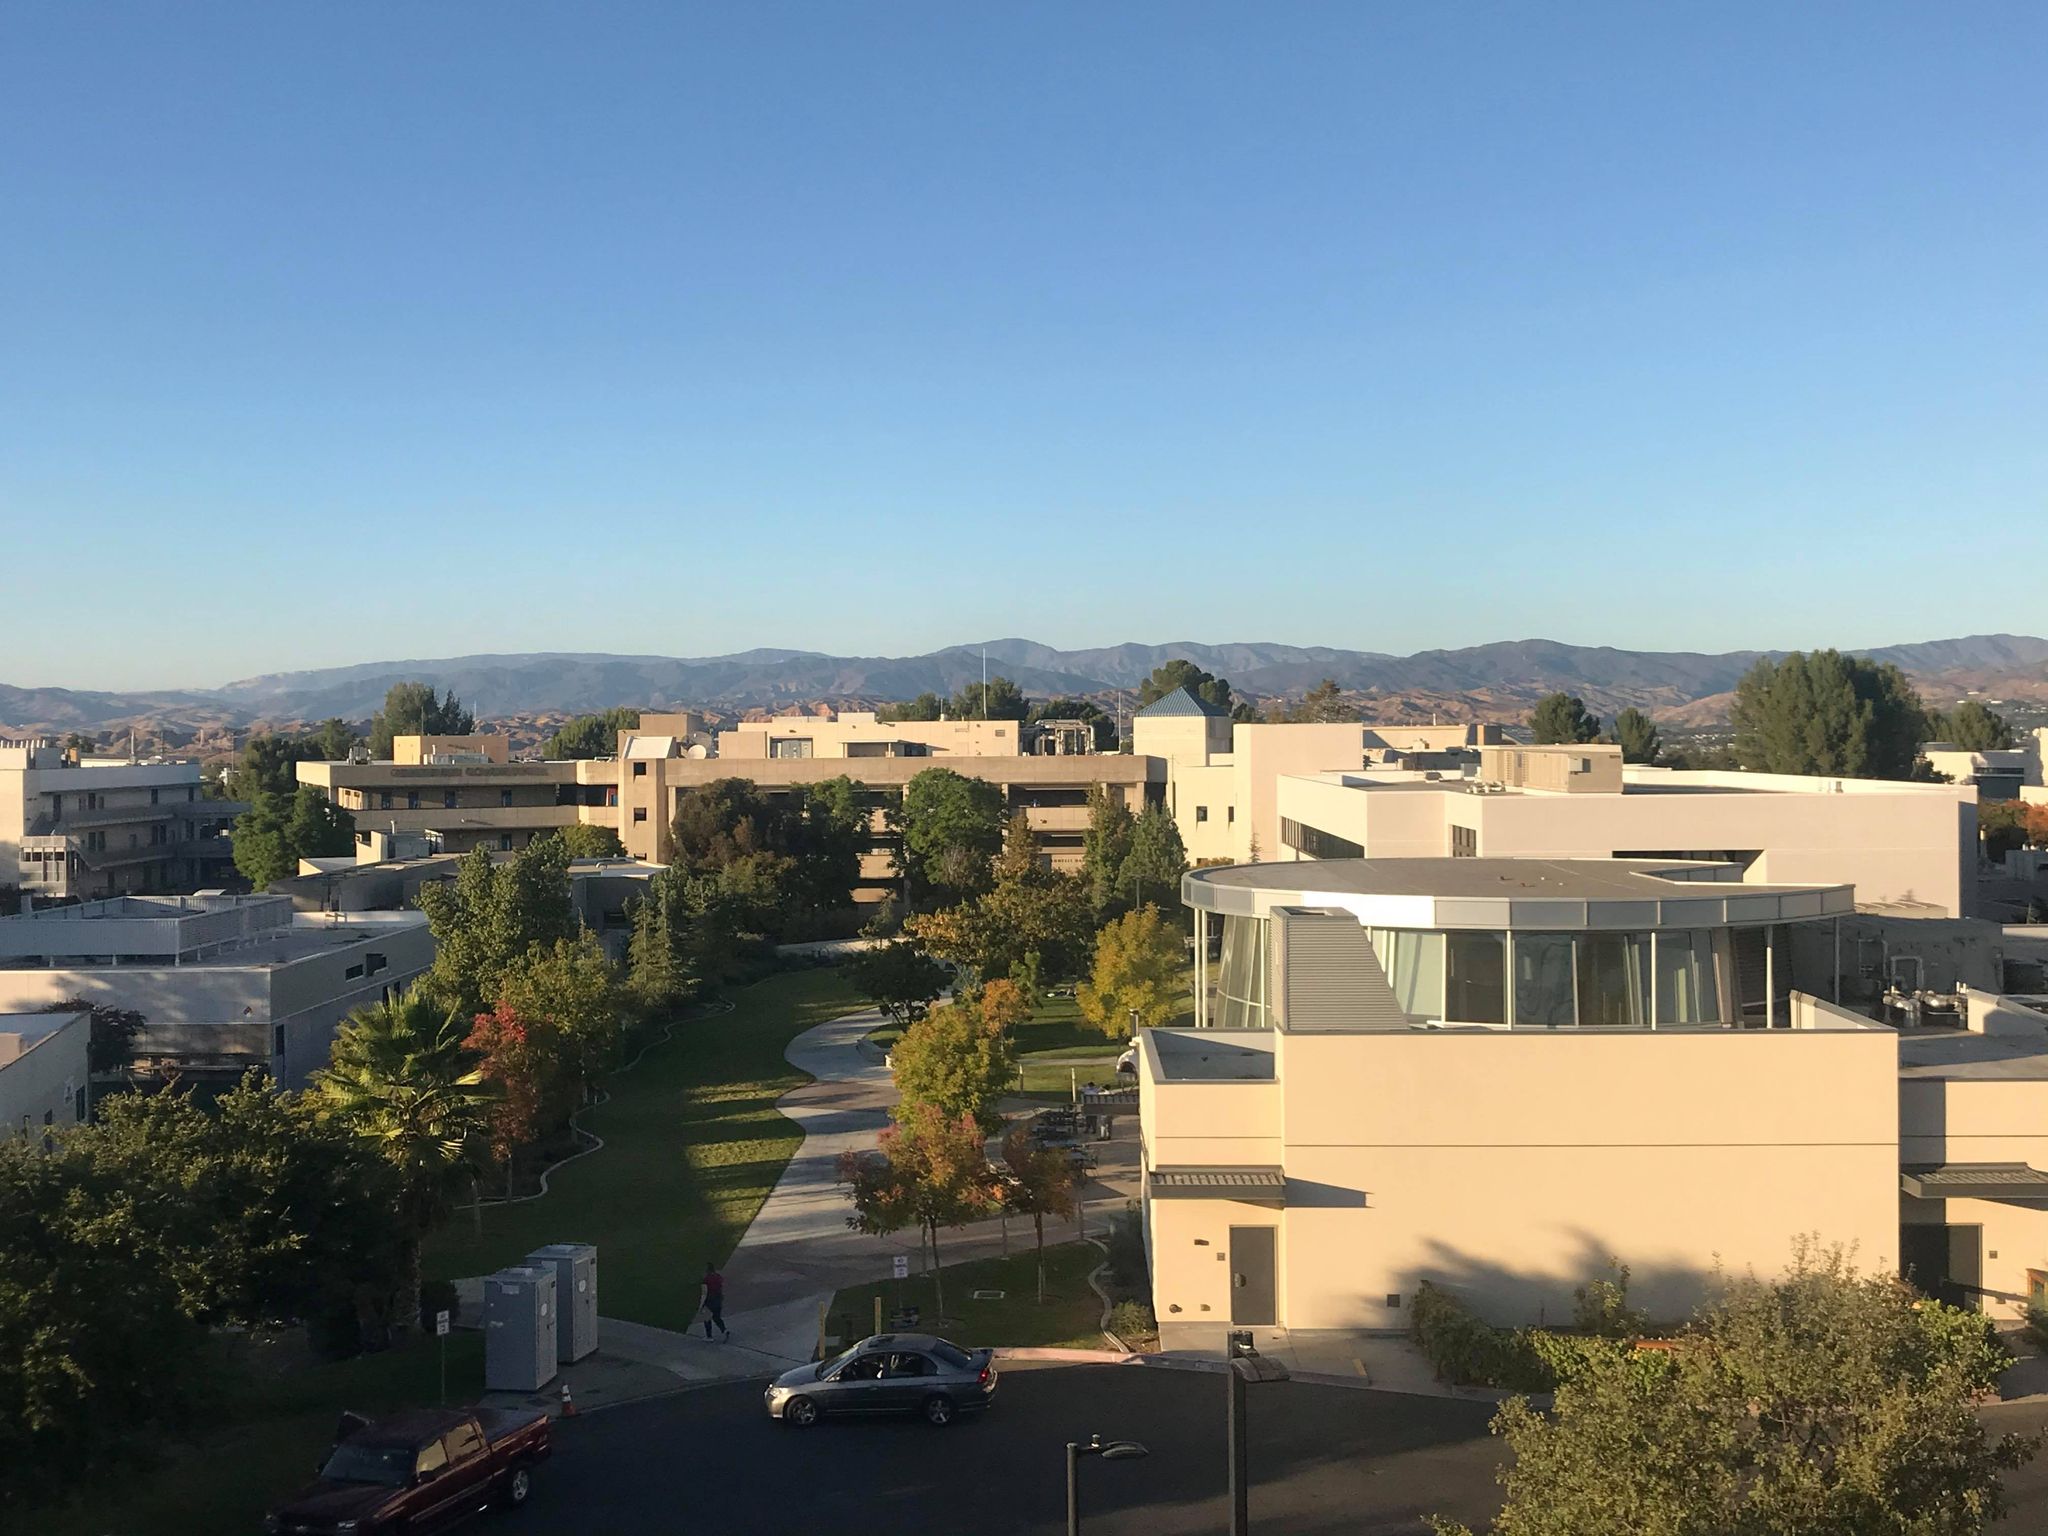 college-of-the-canyons-prepares-for-a-possible-return-of-in-person-labs-in-fall-2021-canyons-news